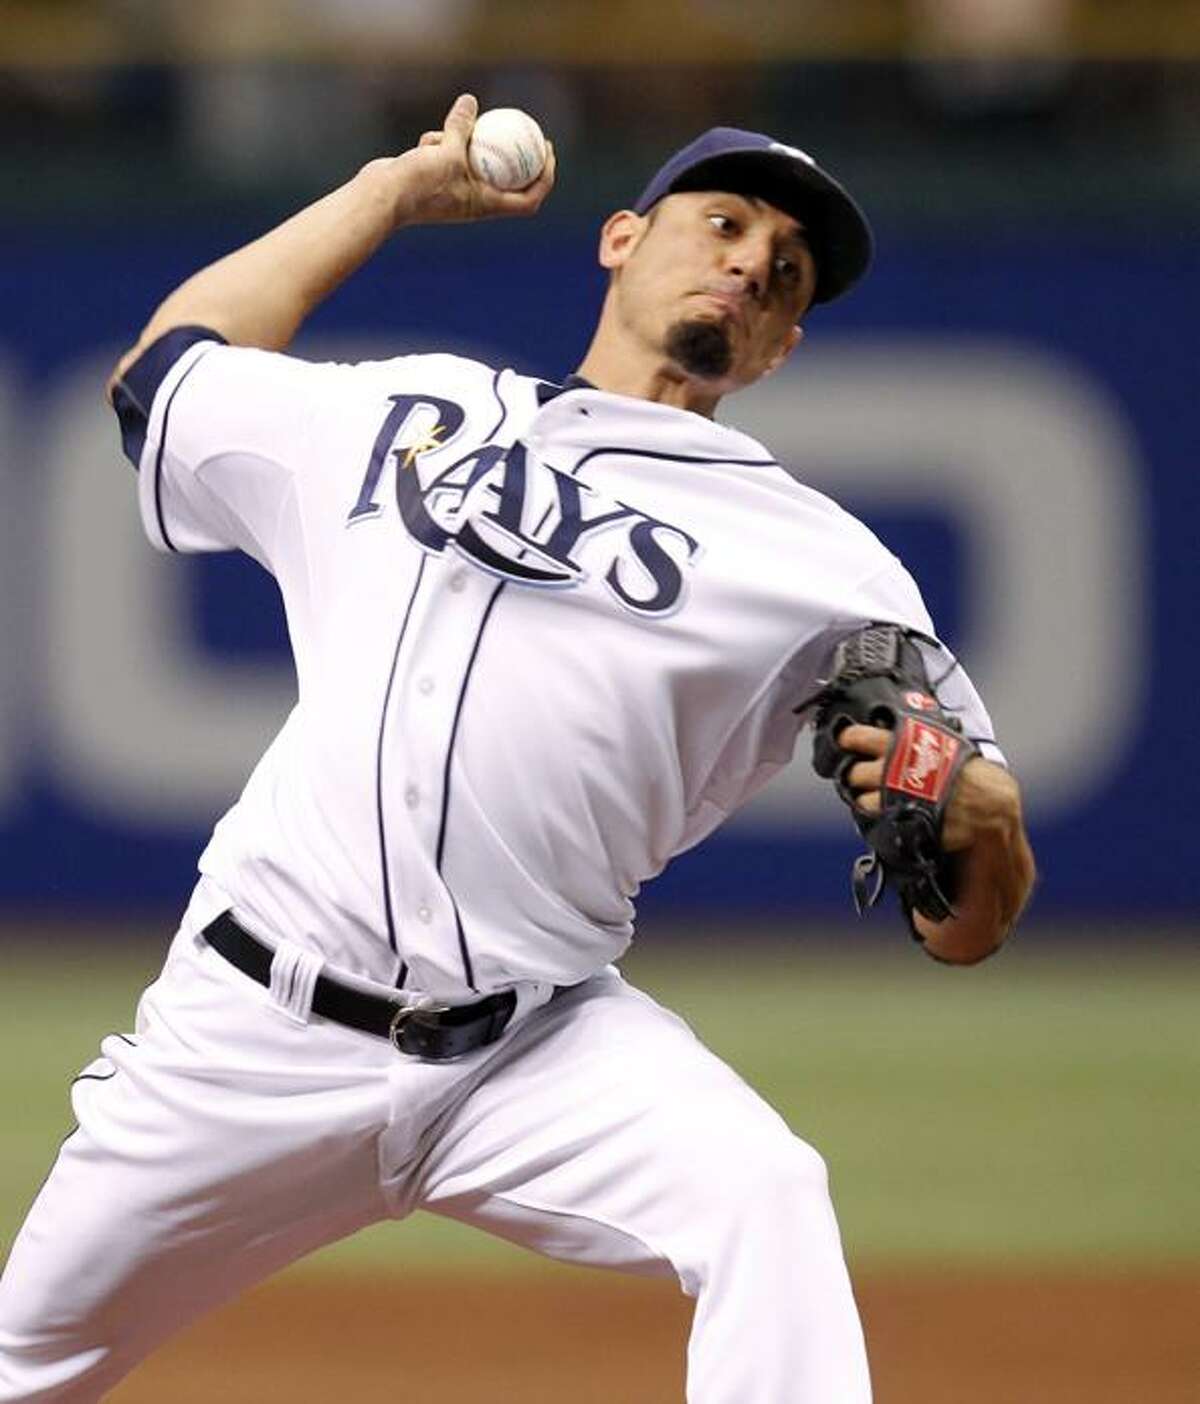 Tampa Bay Rays starting pitcher Matt Garza throws in the first inning of a baseball game against the Detroit Tigers, Monday in St. Petersburg, Fla. Garza ended up throwing the first no-hitter in Tampa Bay Rays history. (AP Photo/Mike Carlson)